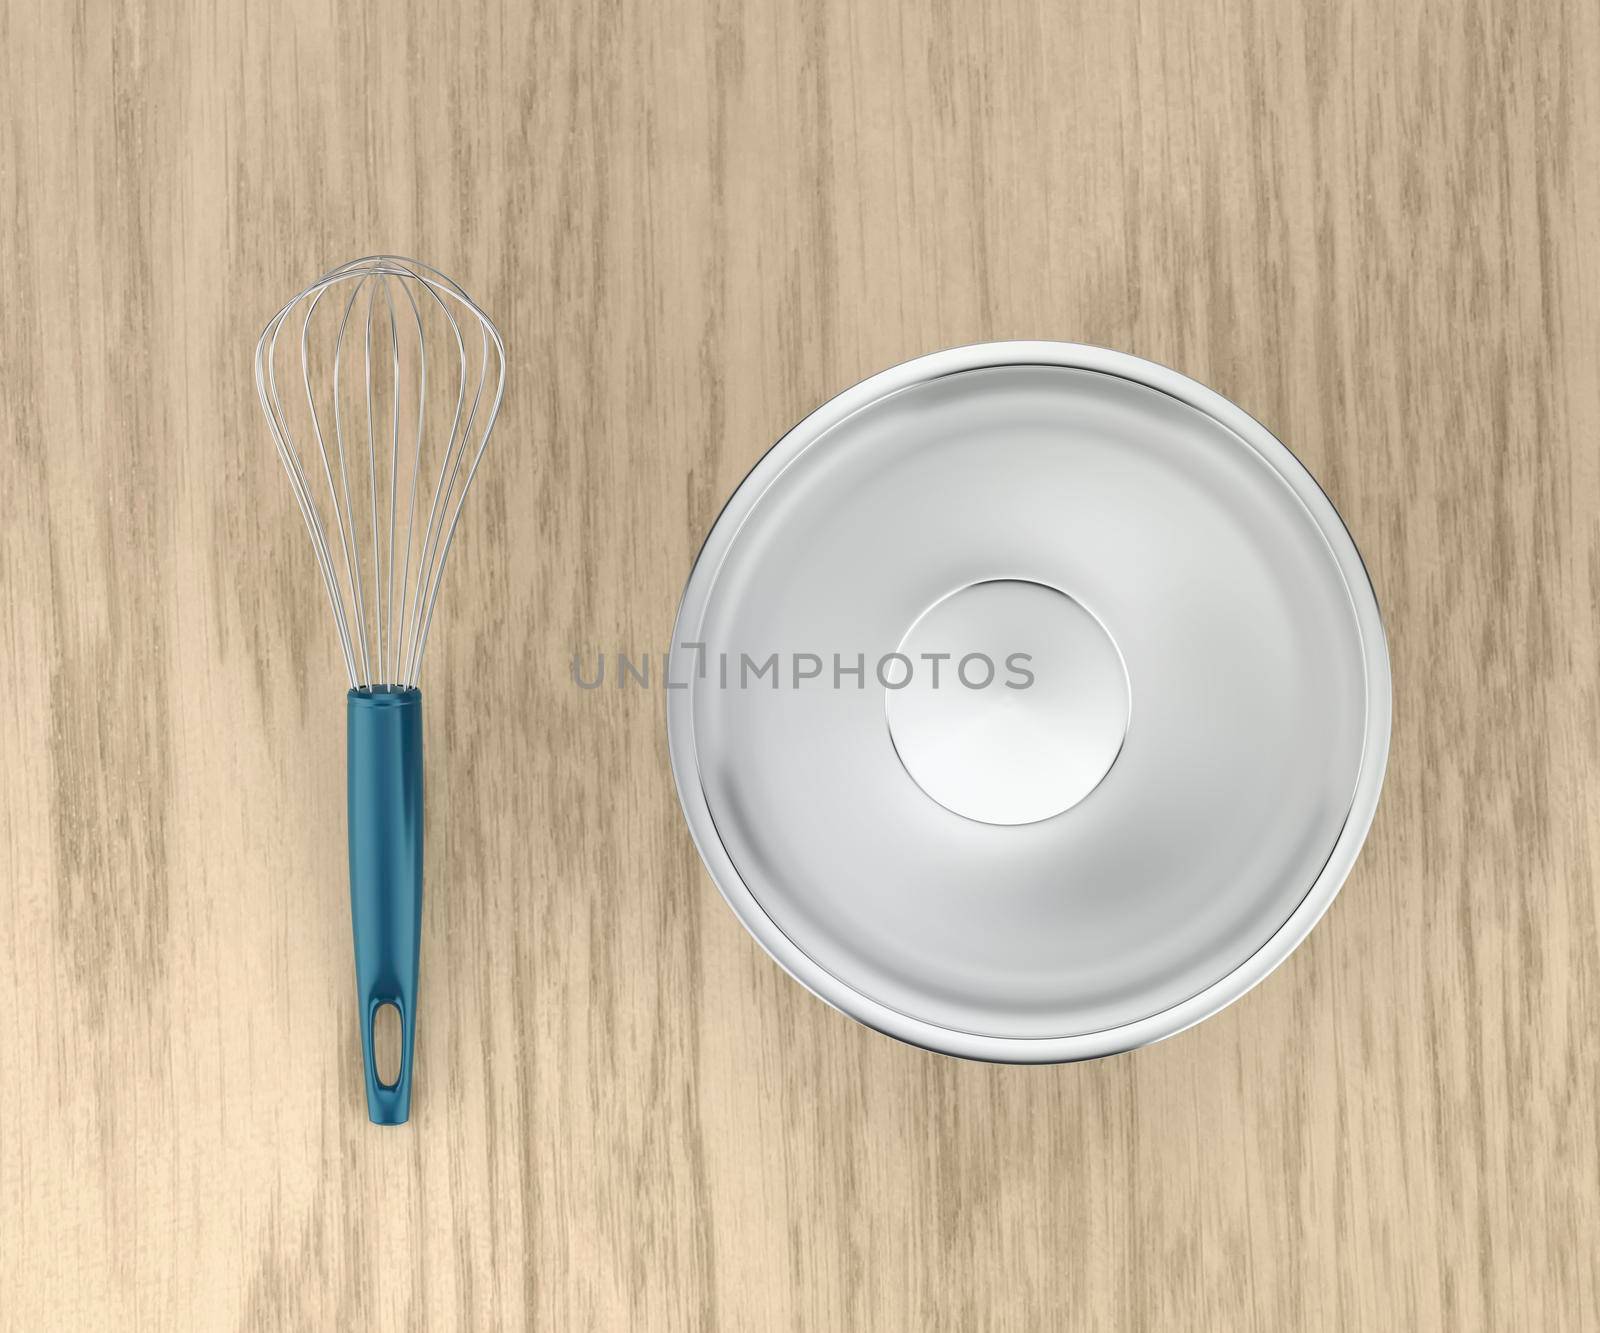 Balloon whisk and metal bowl on wood table, top view